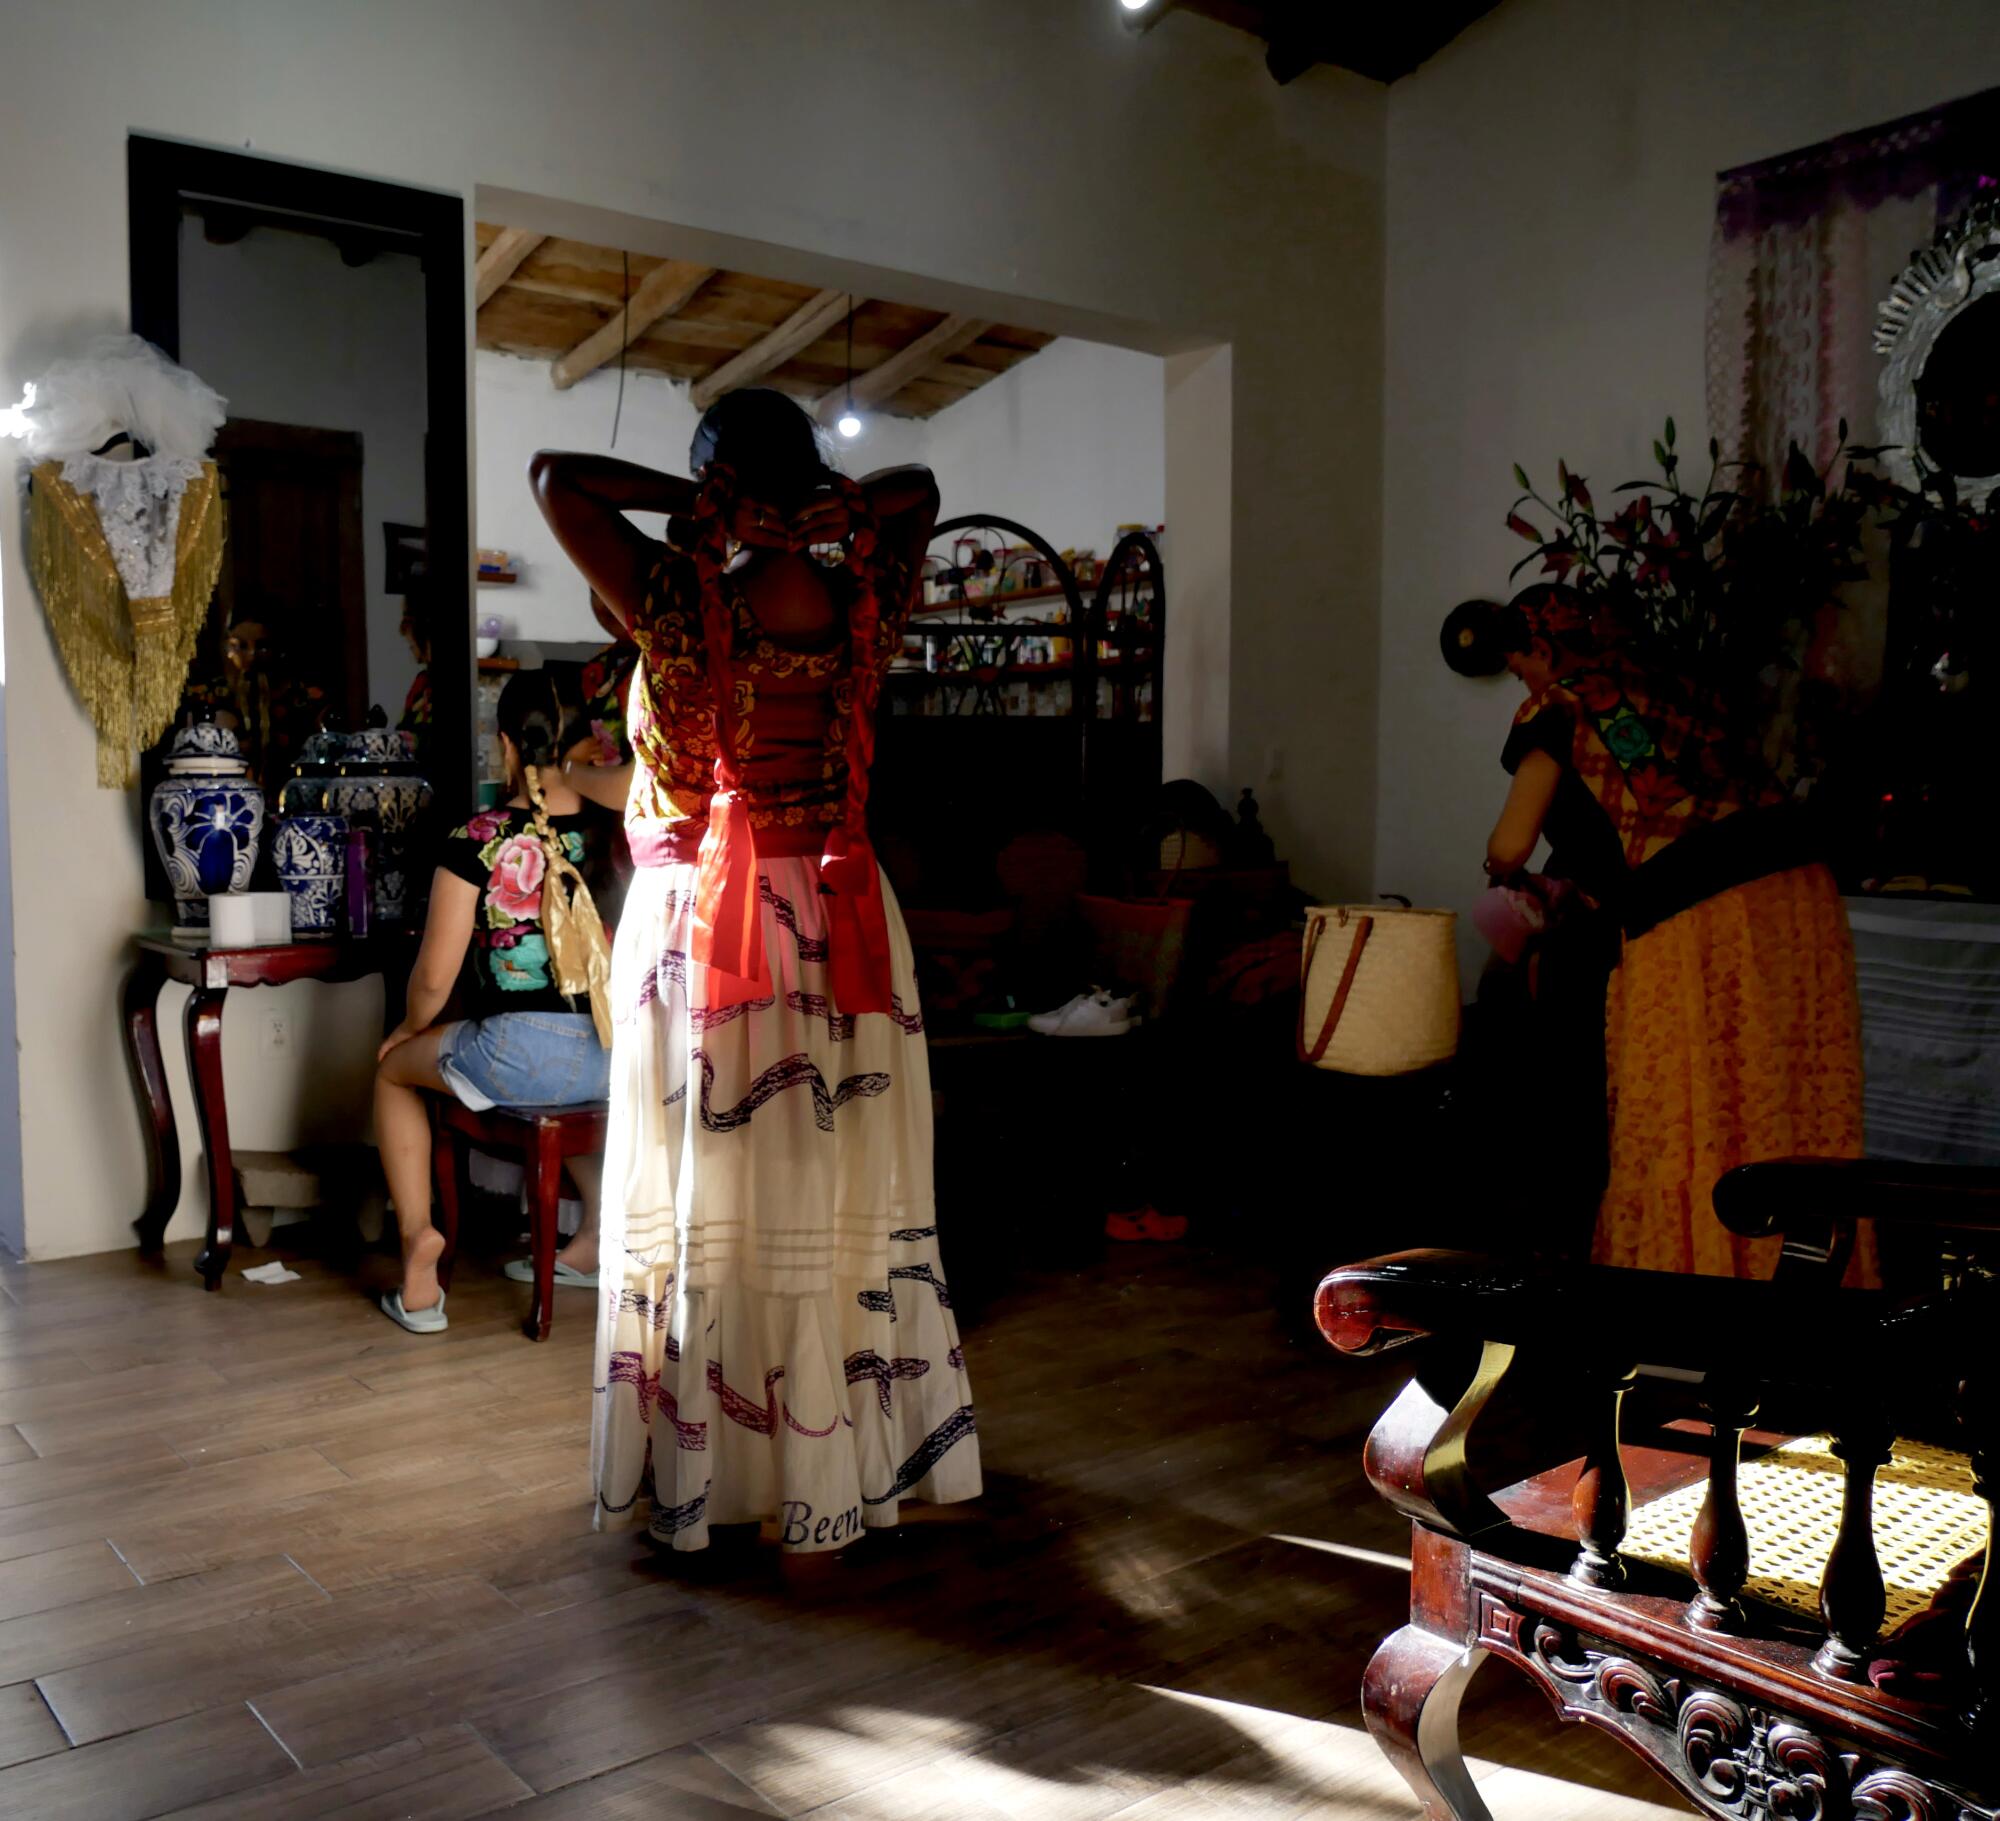 Two muxes make final outfit checks at home before joining the celebrations in Juchitan de Zaragoza